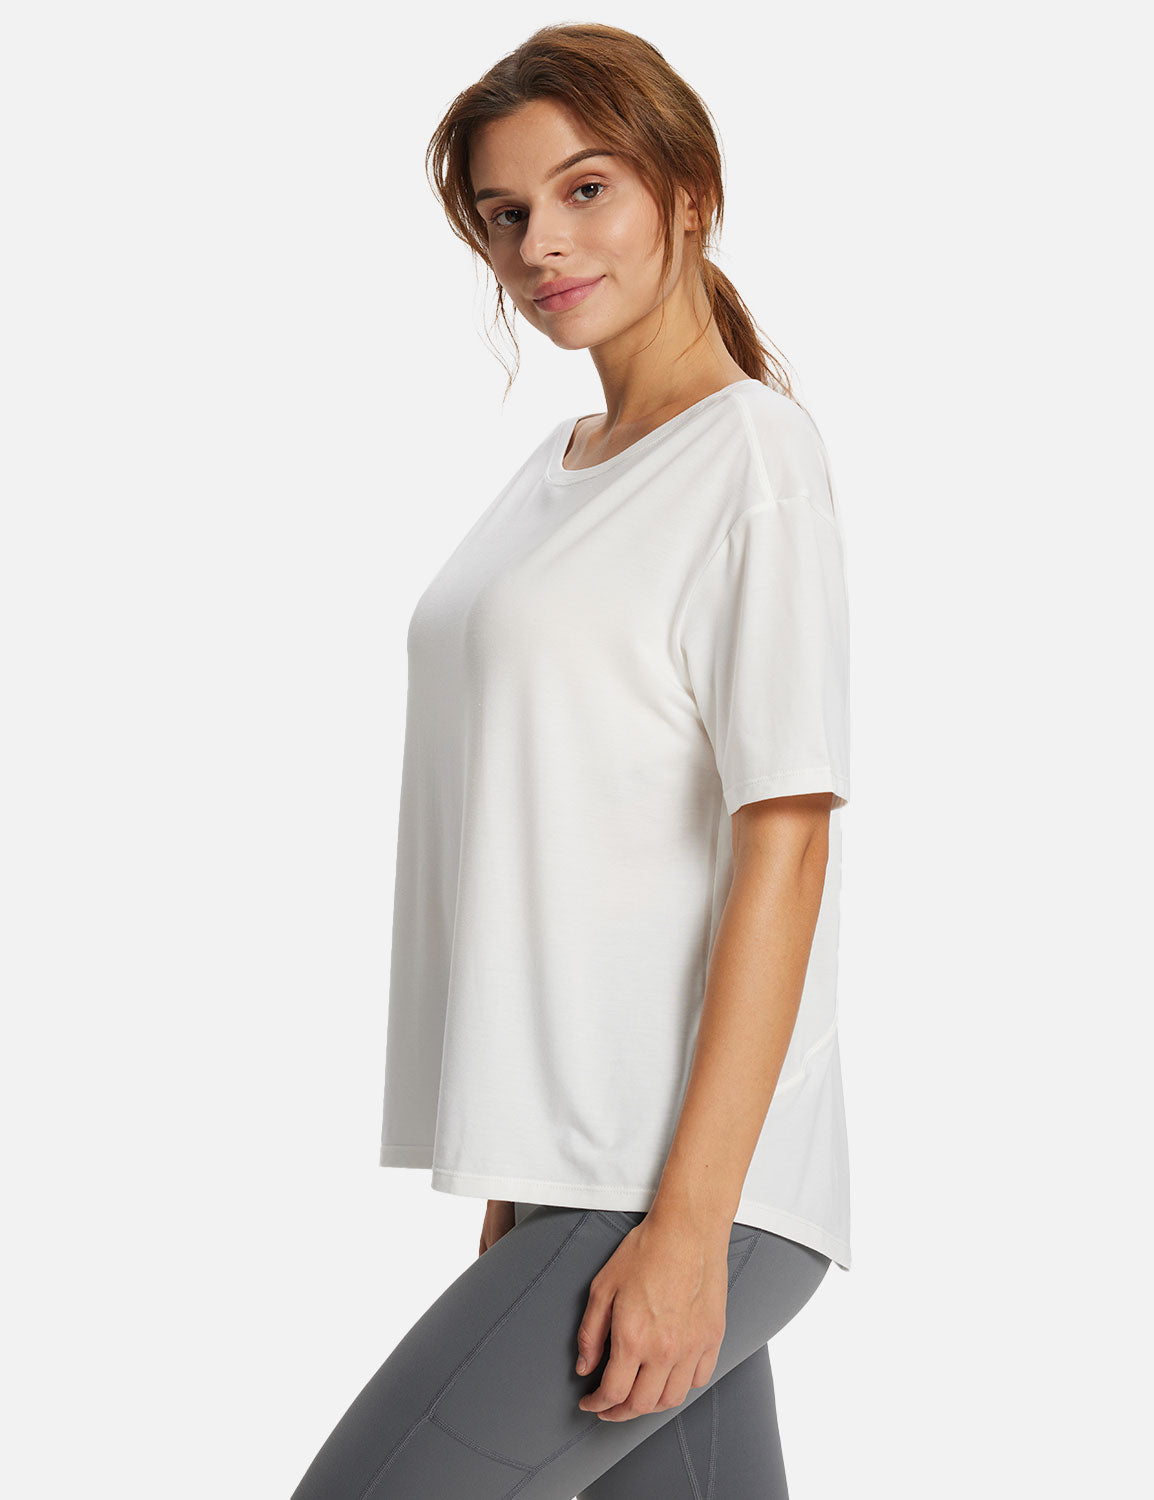 Baleaf Women's Summer Stylish Boatneck Slouch Fit Tee Lucent White Side